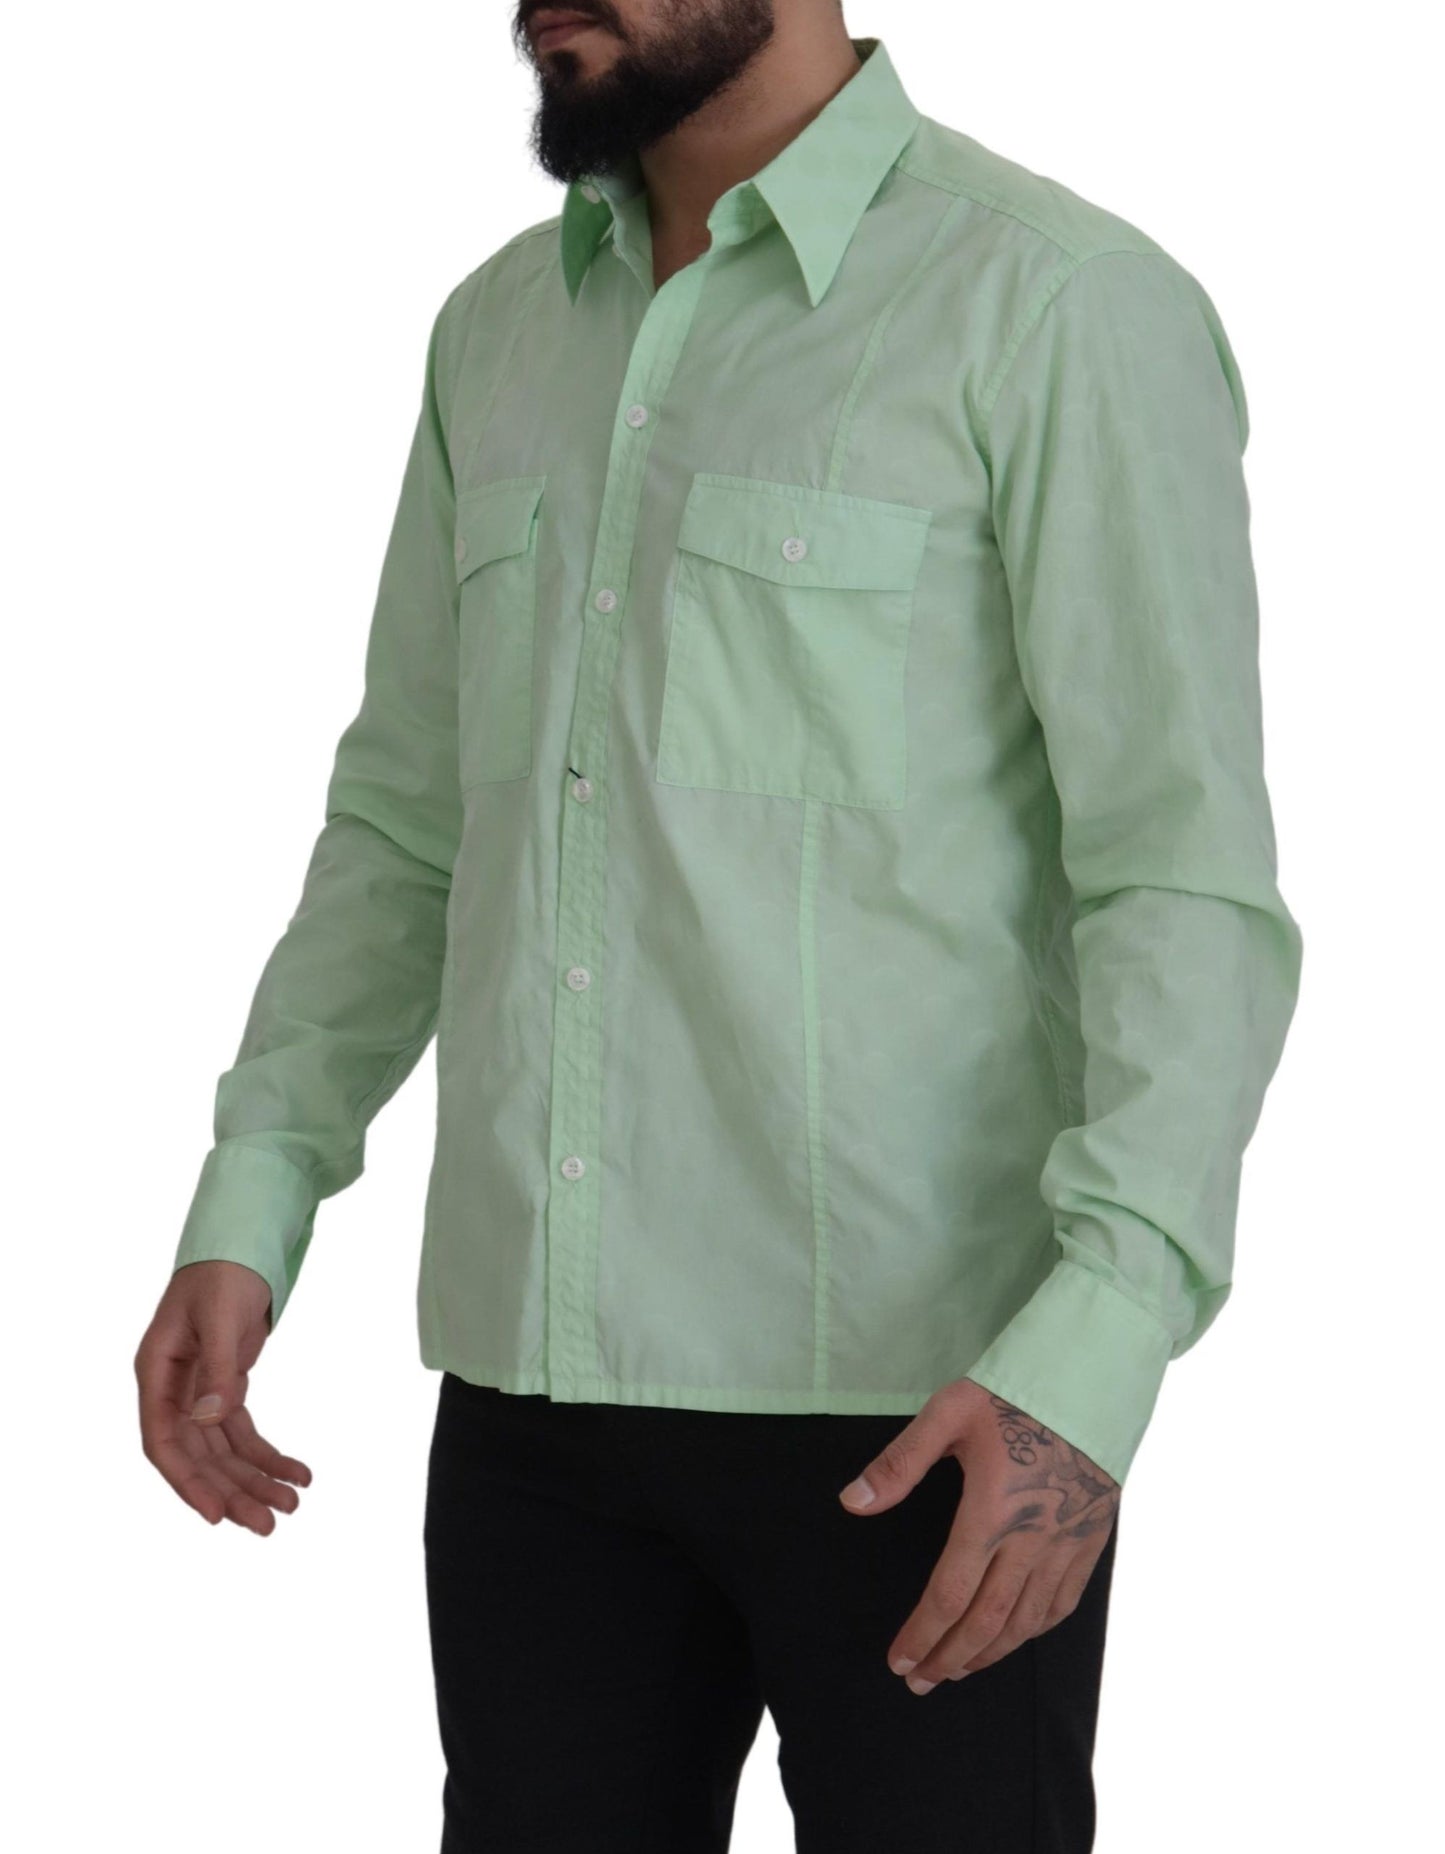 Mint Green Slim Fit Casual Button-Down Shirt